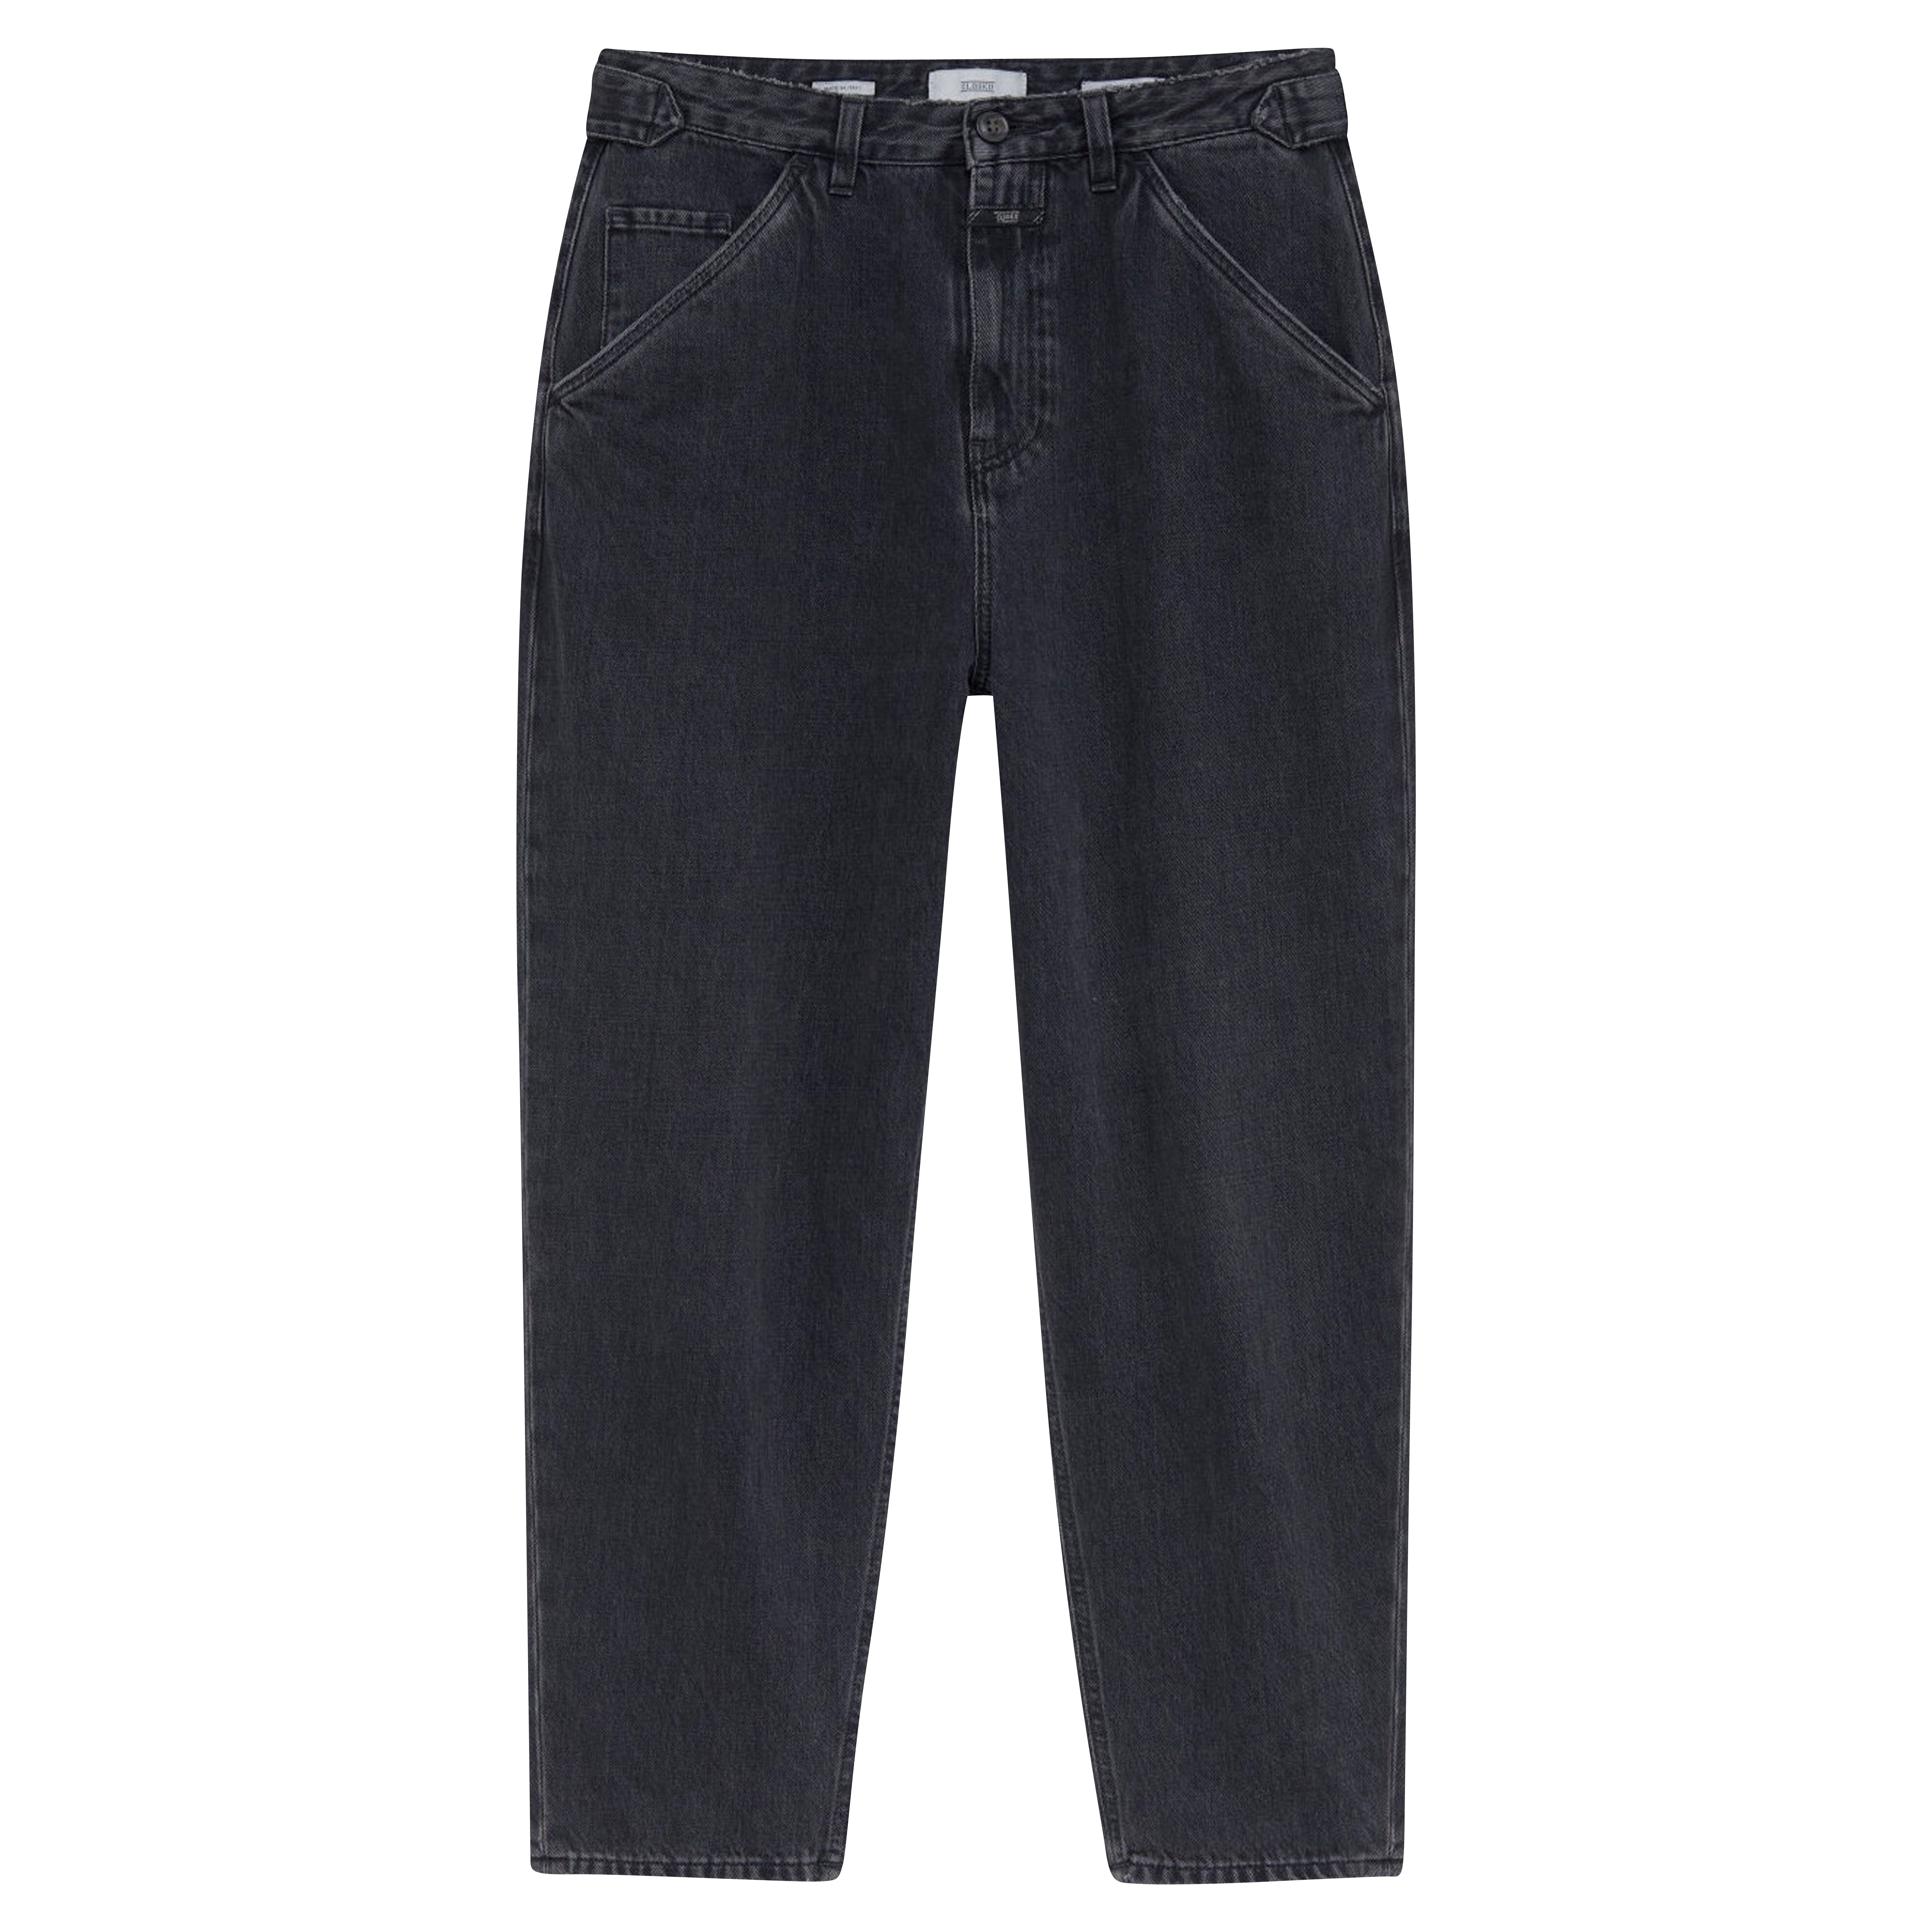 CLOSED Welby Jeans in Dark Grey